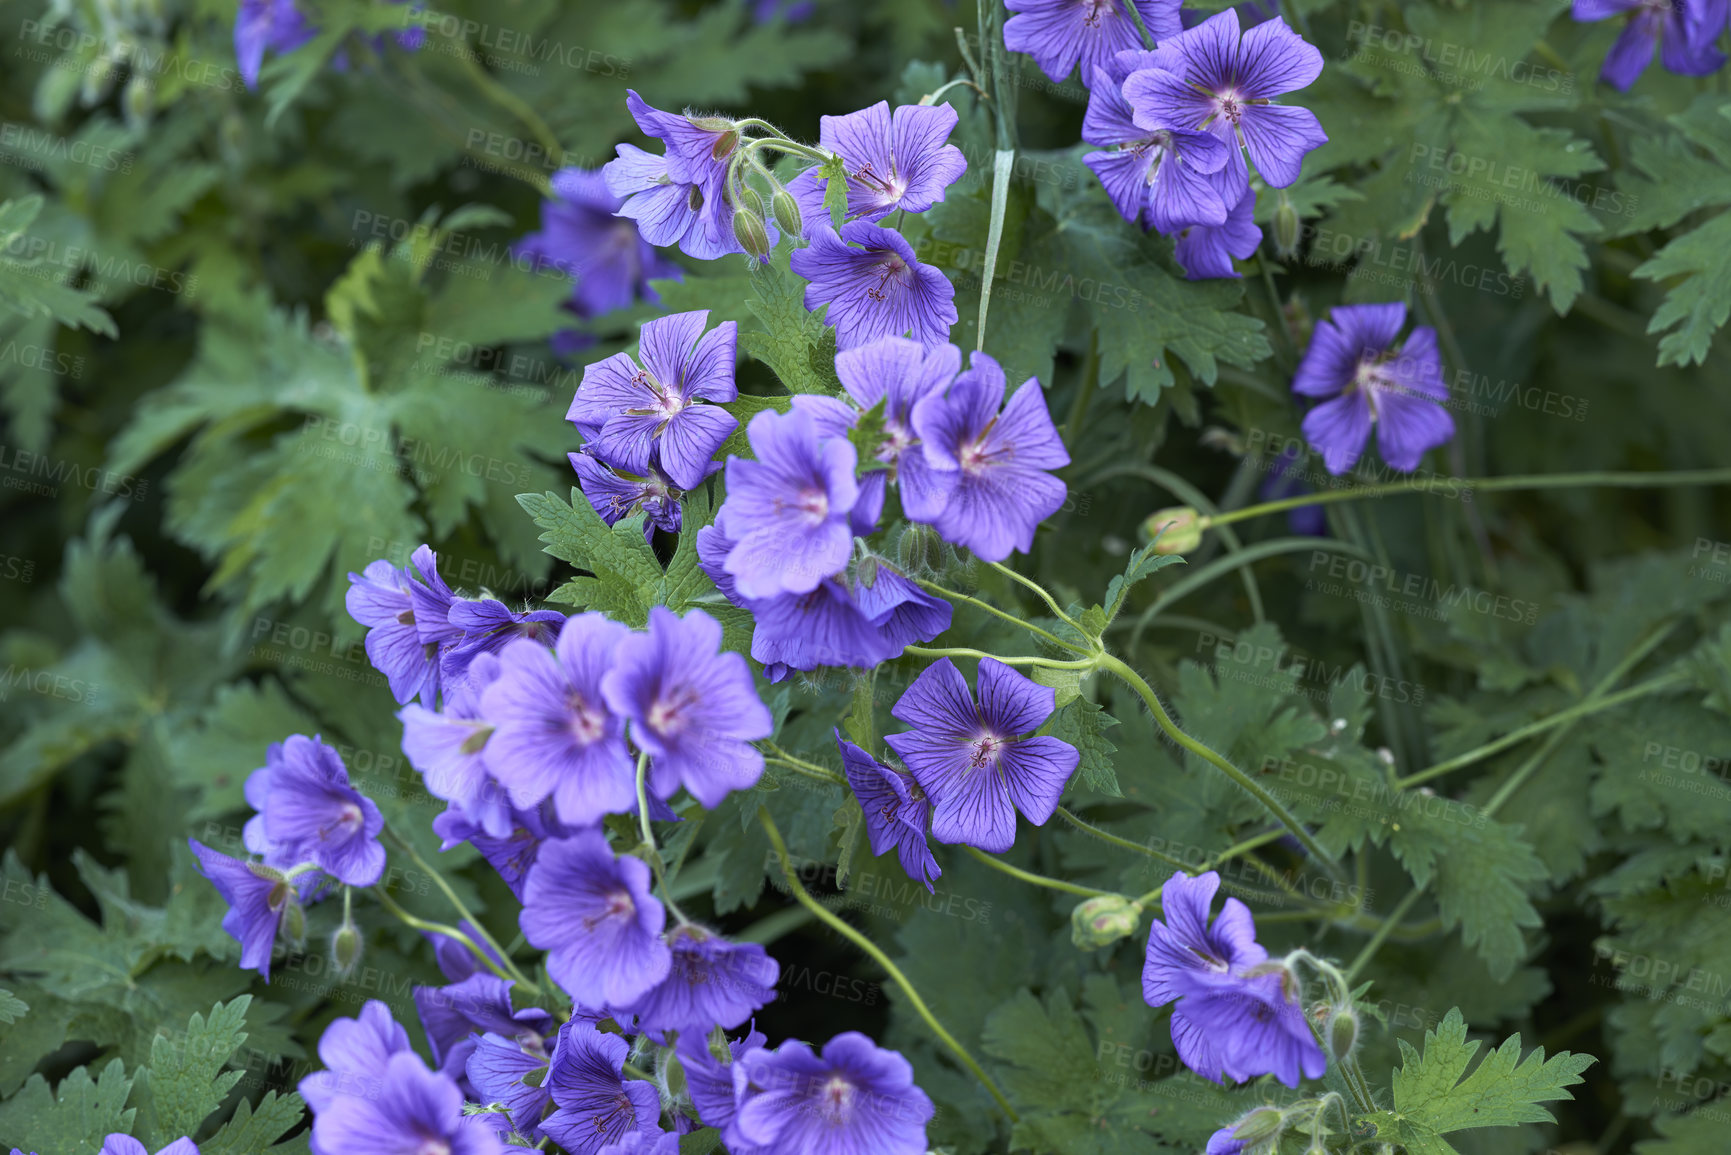 Buy stock photo Beautiful garden flower bed on a lawn. Perennial purple cranesbill blossoms growing and thriving in spring. Colorful ornamental flowers blooming in a neat and green park or well maintained backyard